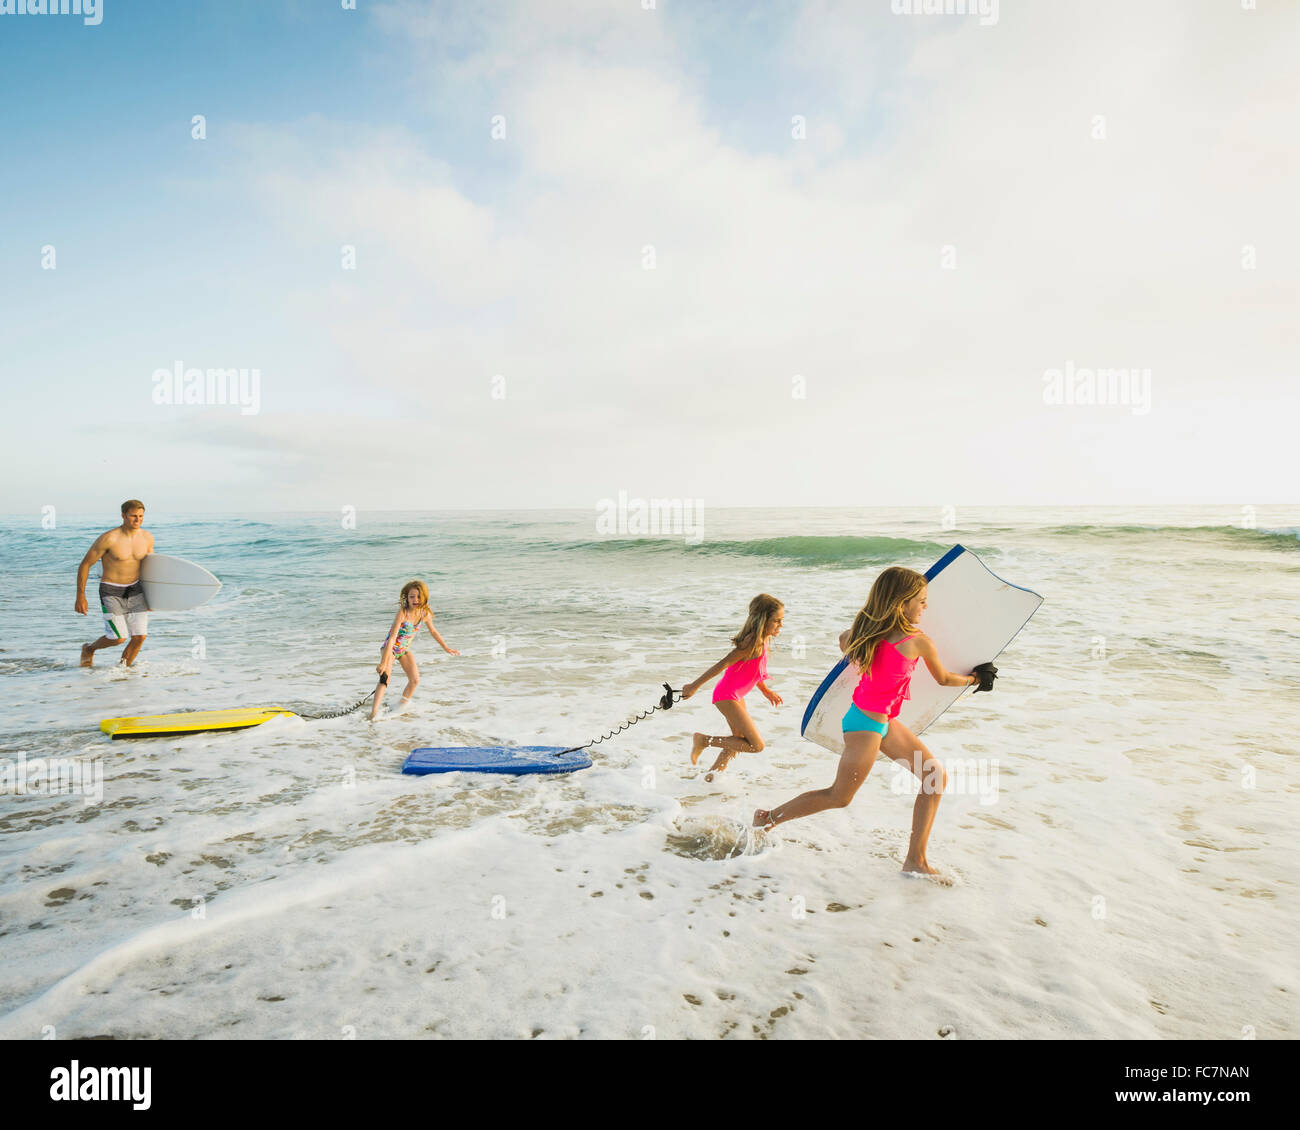 Caucasian father and daughters playing in waves on beach Stock Photo